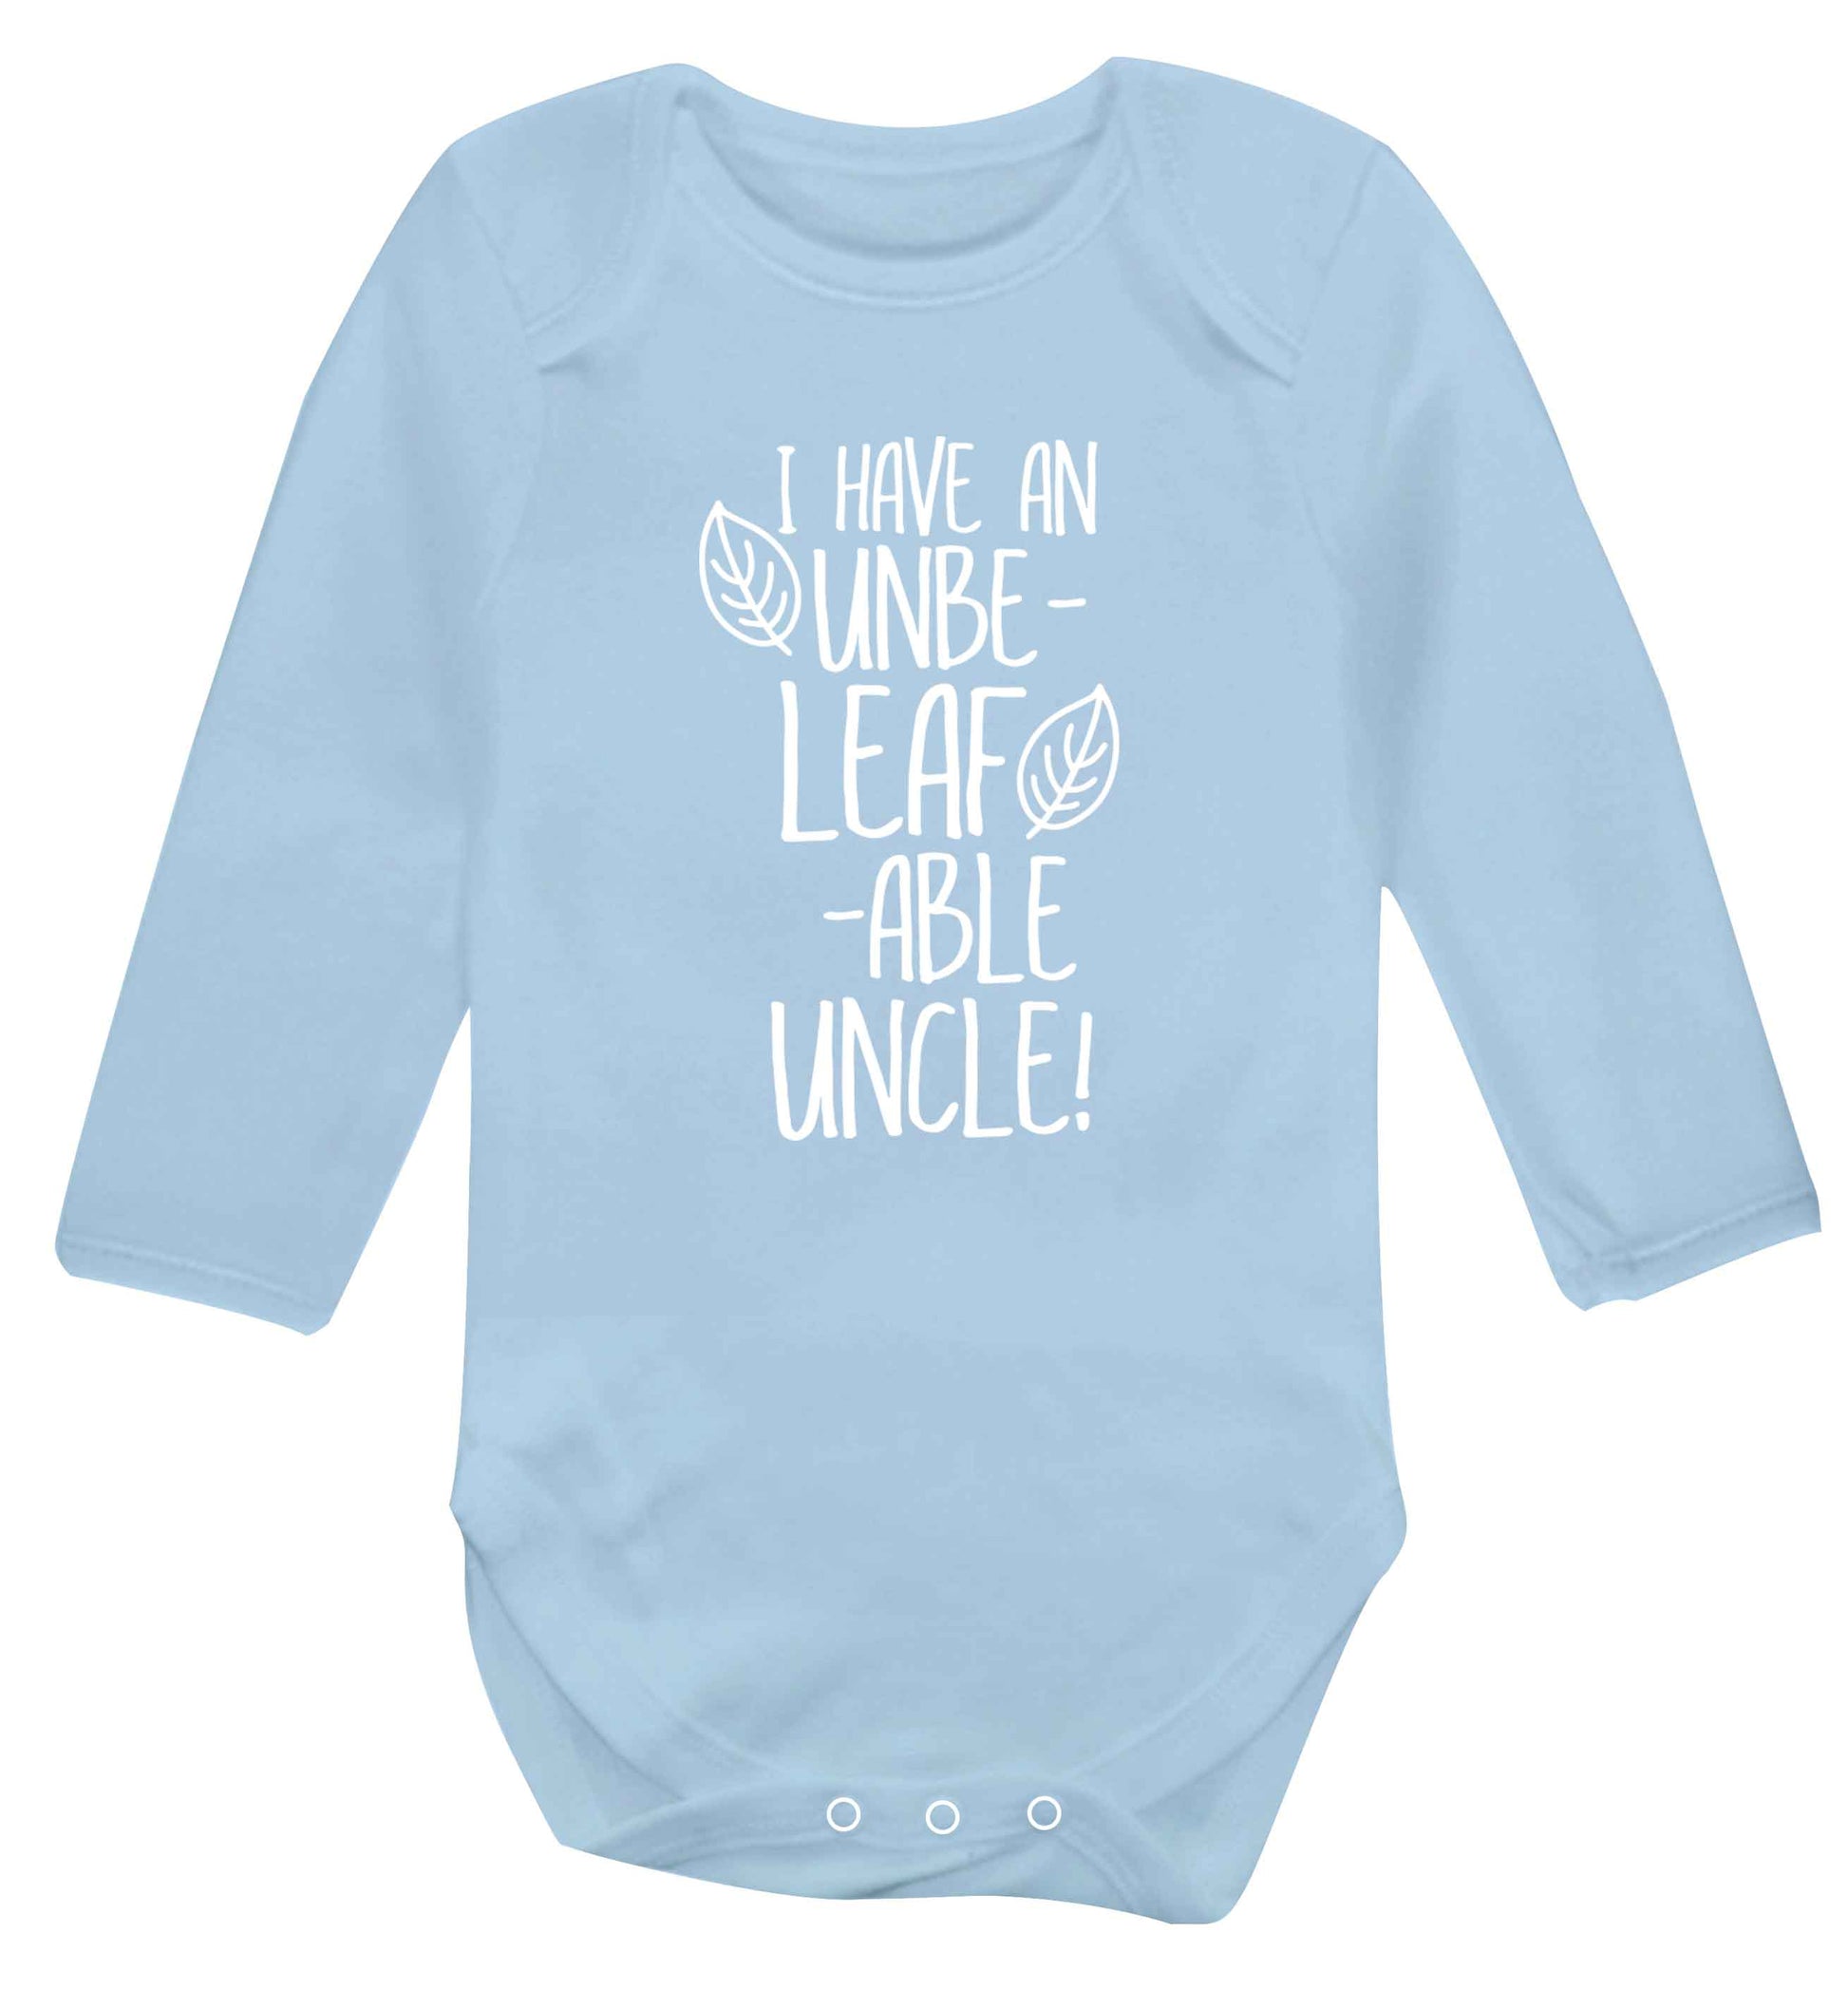 I have an unbe-leaf-able uncle Baby Vest long sleeved pale blue 6-12 months